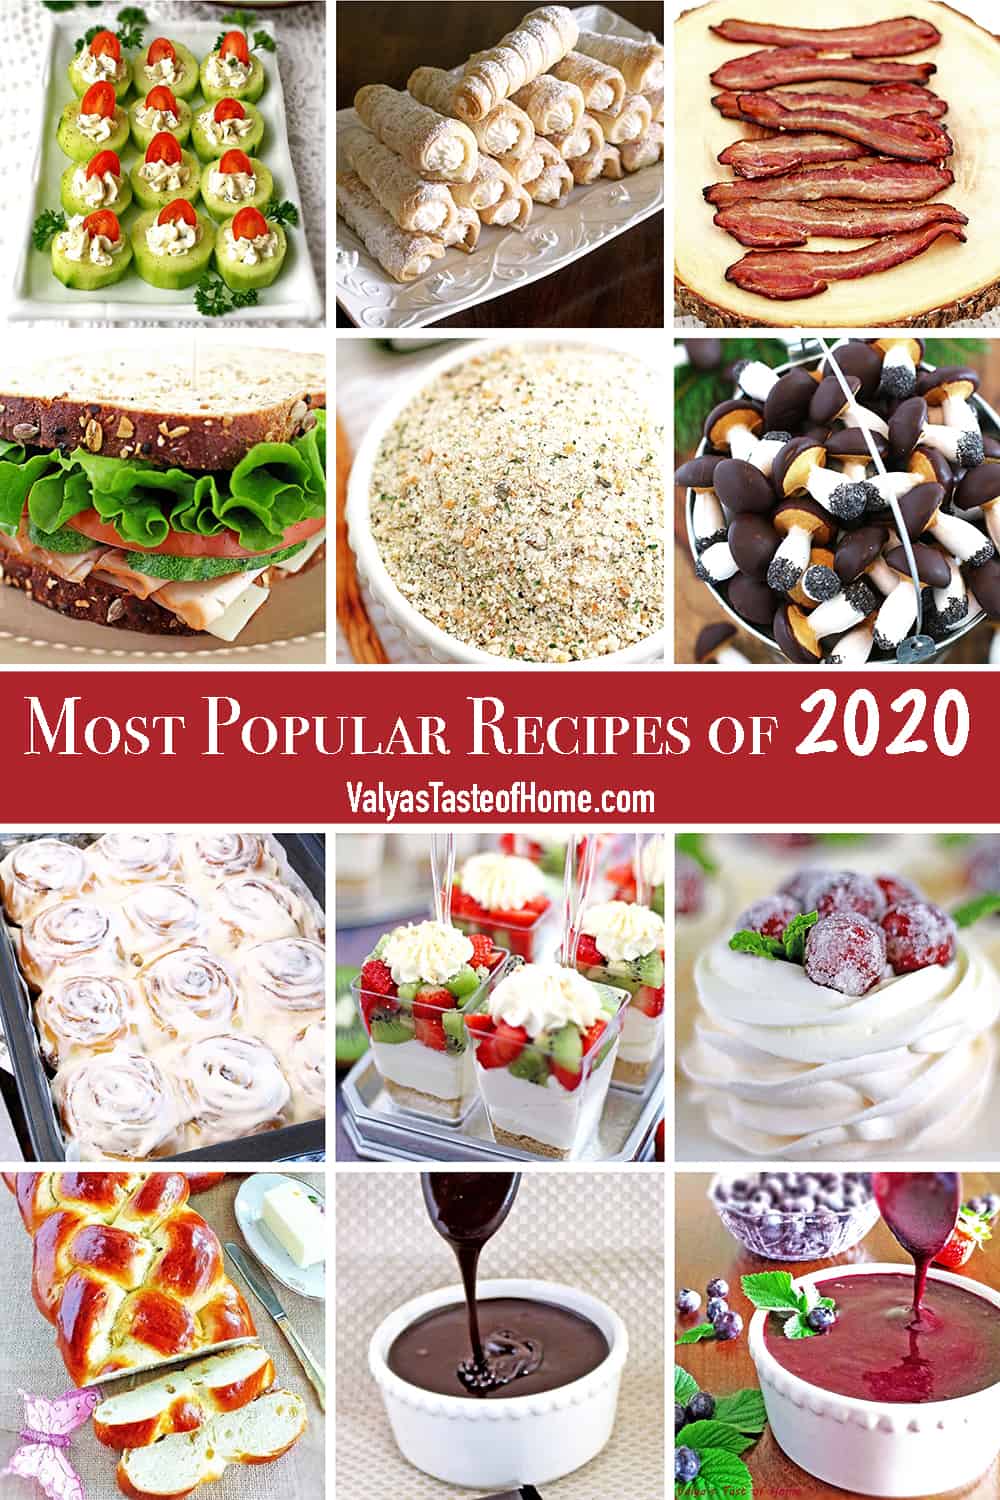 This is a list of the Top 12 Most Popular Recipes of 2020 according to google analytics. It always has been fun to see which recipes were the most popular of the year. Read on to see if your favorite recipe made the list.